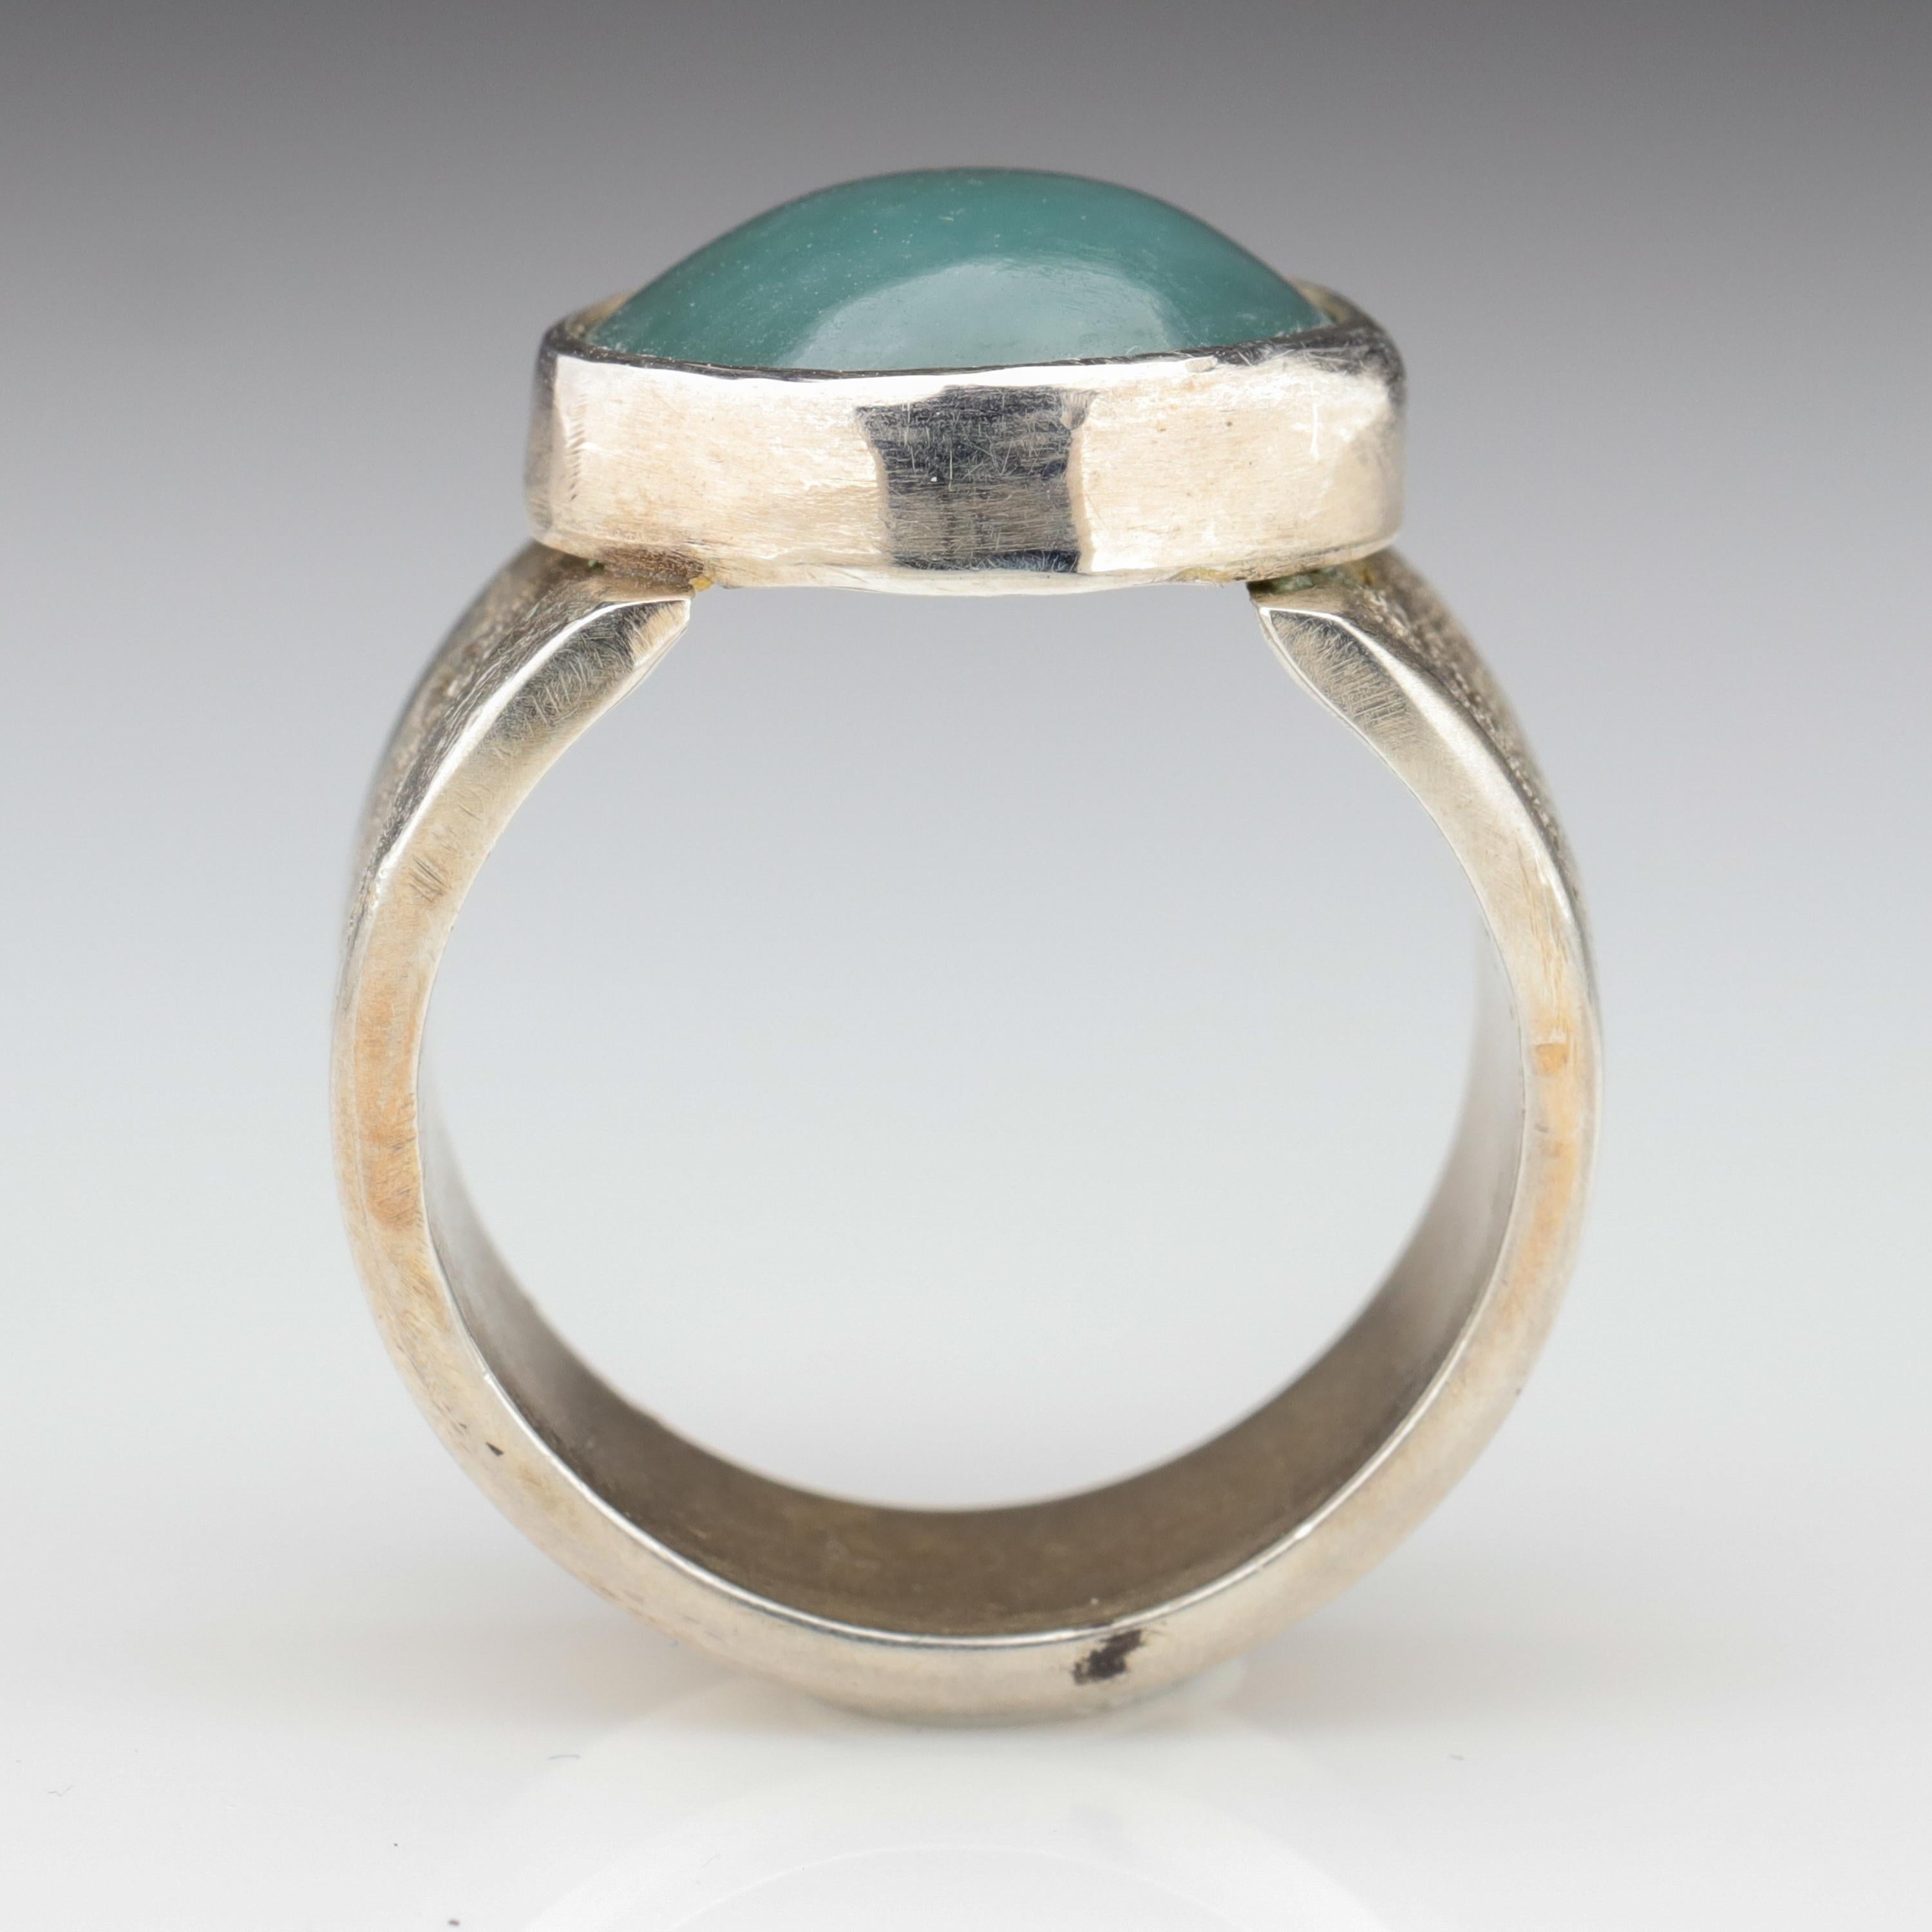 Blue is among the most uncommon —the rarest— colors of jadeite jade. And this contemporary hand-fabricated silver ring features a glowing, translucent bluish-green cabochon of certified natural and untreated jadeite jade from Burma. The particular